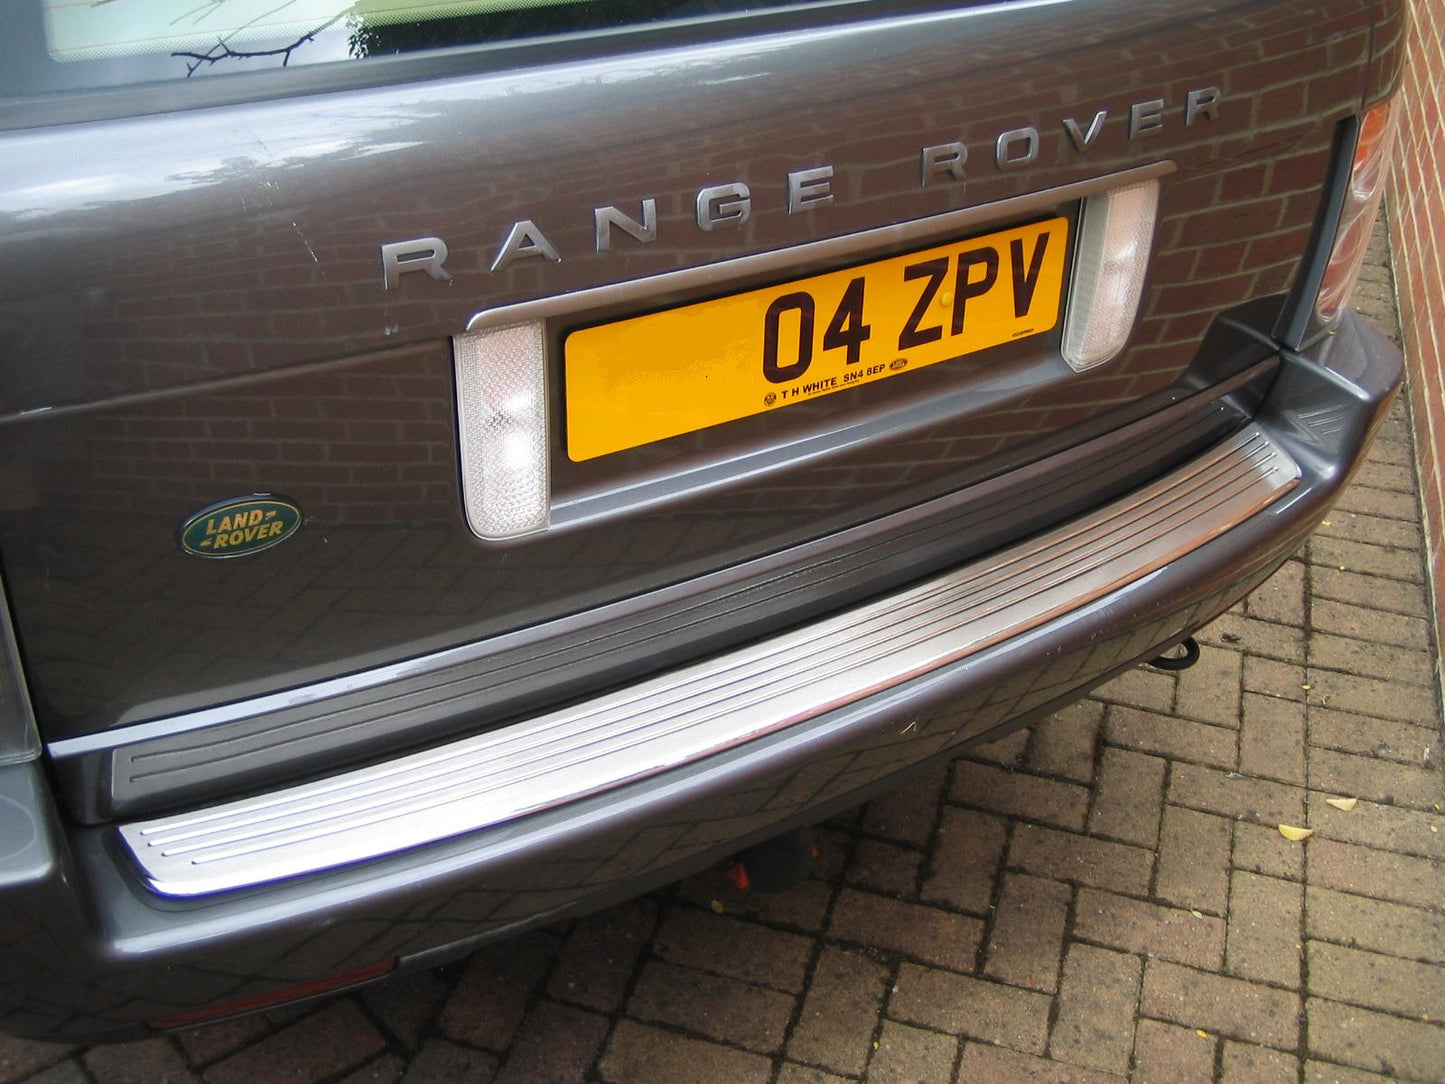 Rear Bumper Step Cover for Range Rover L322 - Brushed Stainless